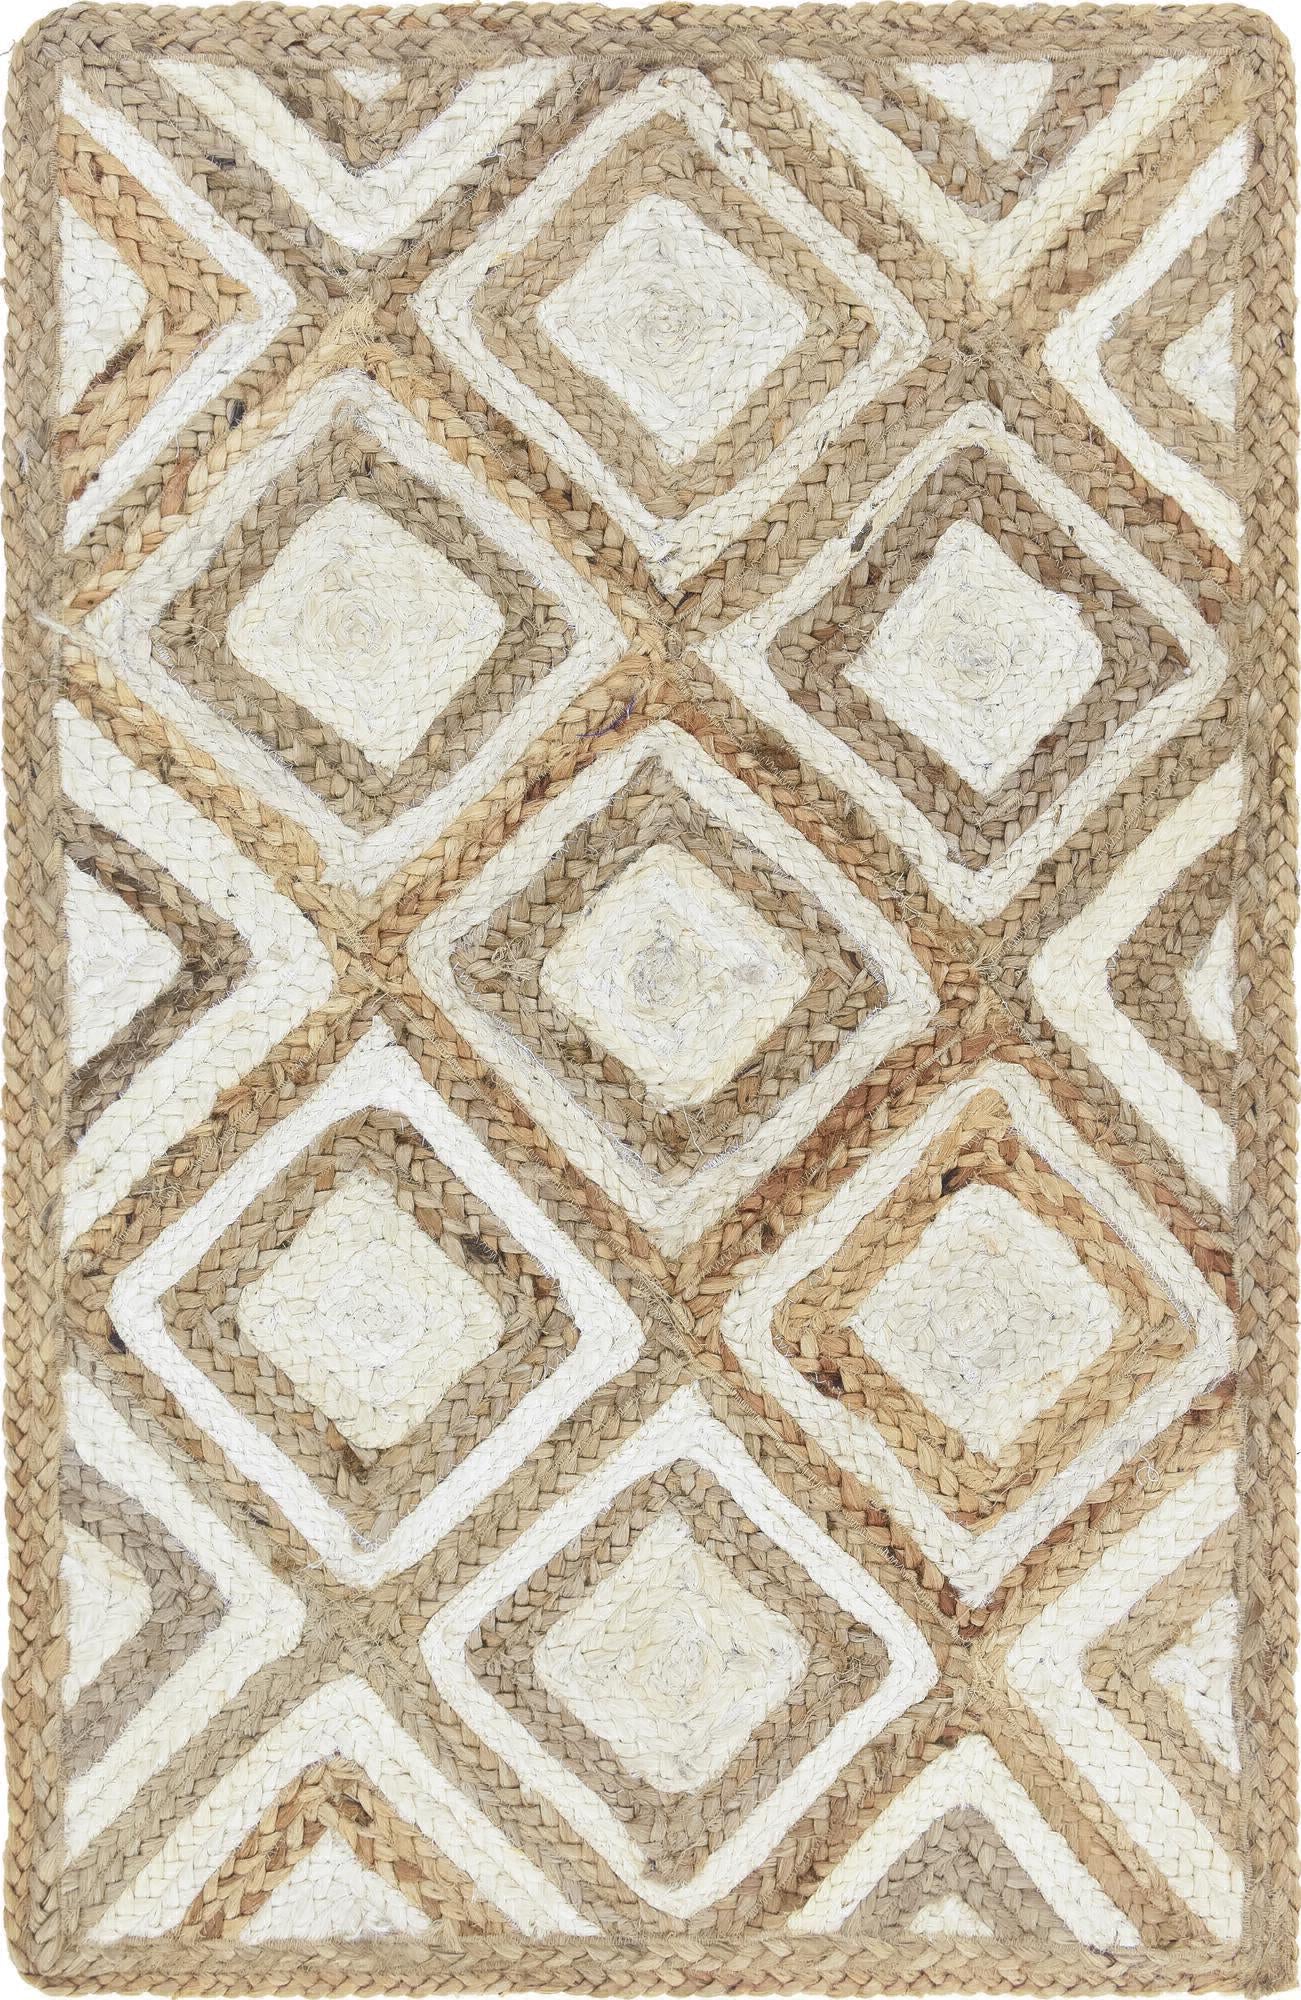 Unique Loom Braided Jute MGN-6 Natural Area Rug main image